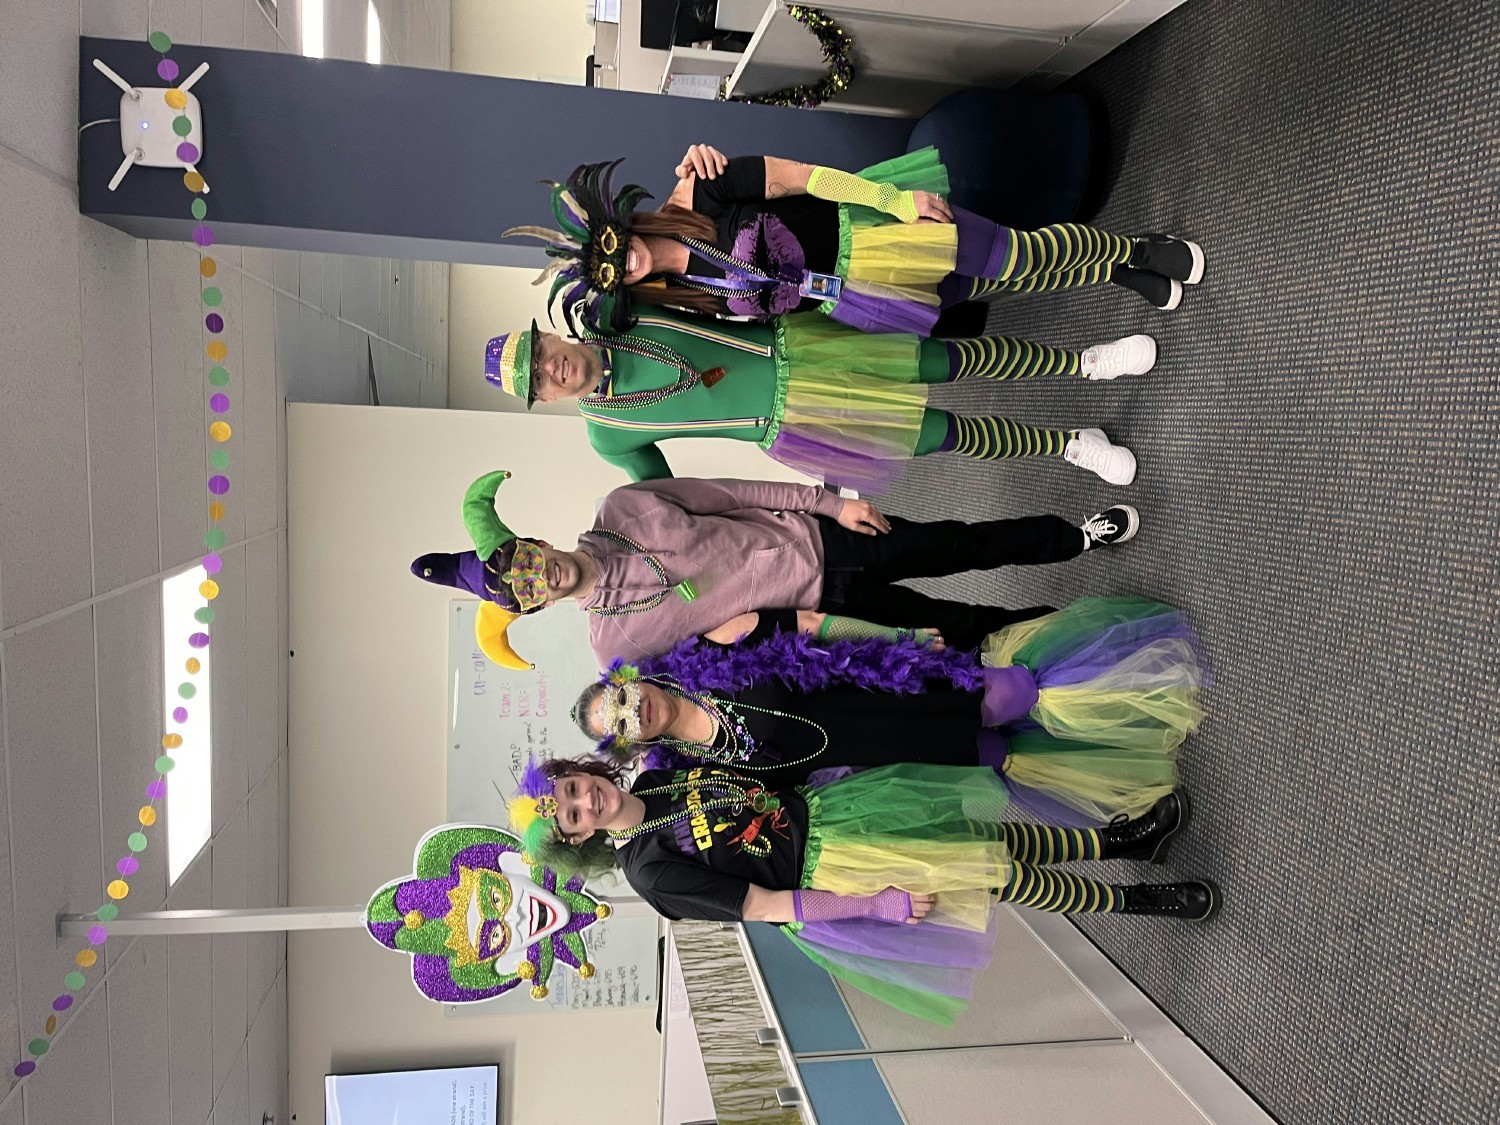 Mardi Gras is one of our favorite holidays at Pegasus Logistics Group!